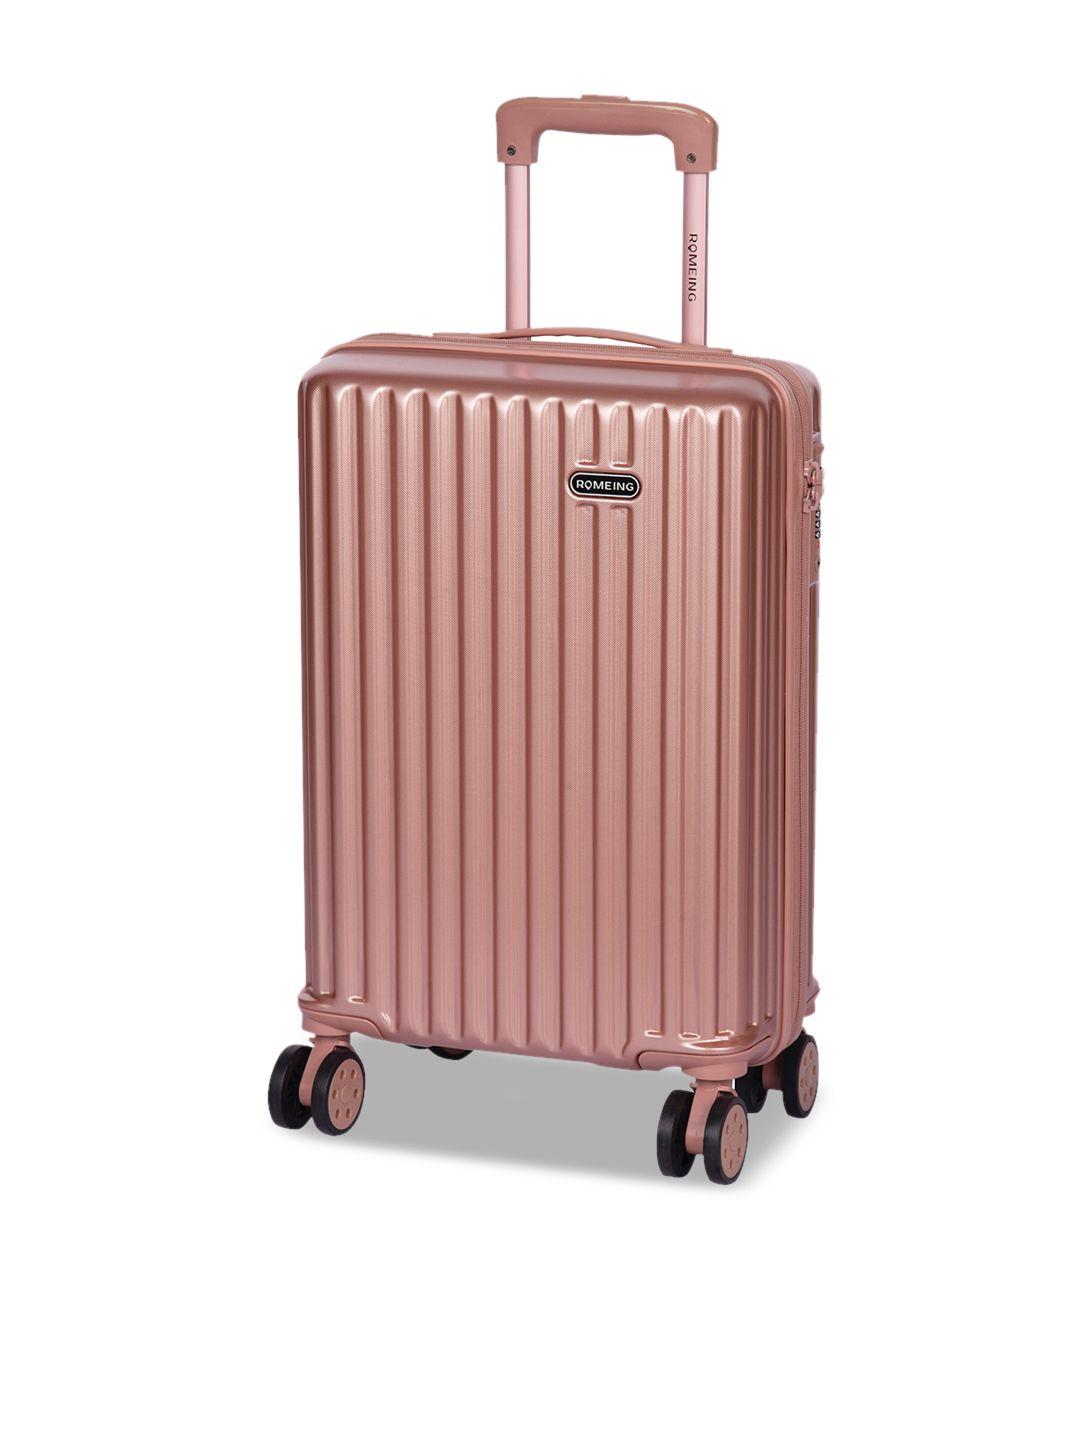 romeing genoa polycarbonate hard sided cabin trolley suitcase